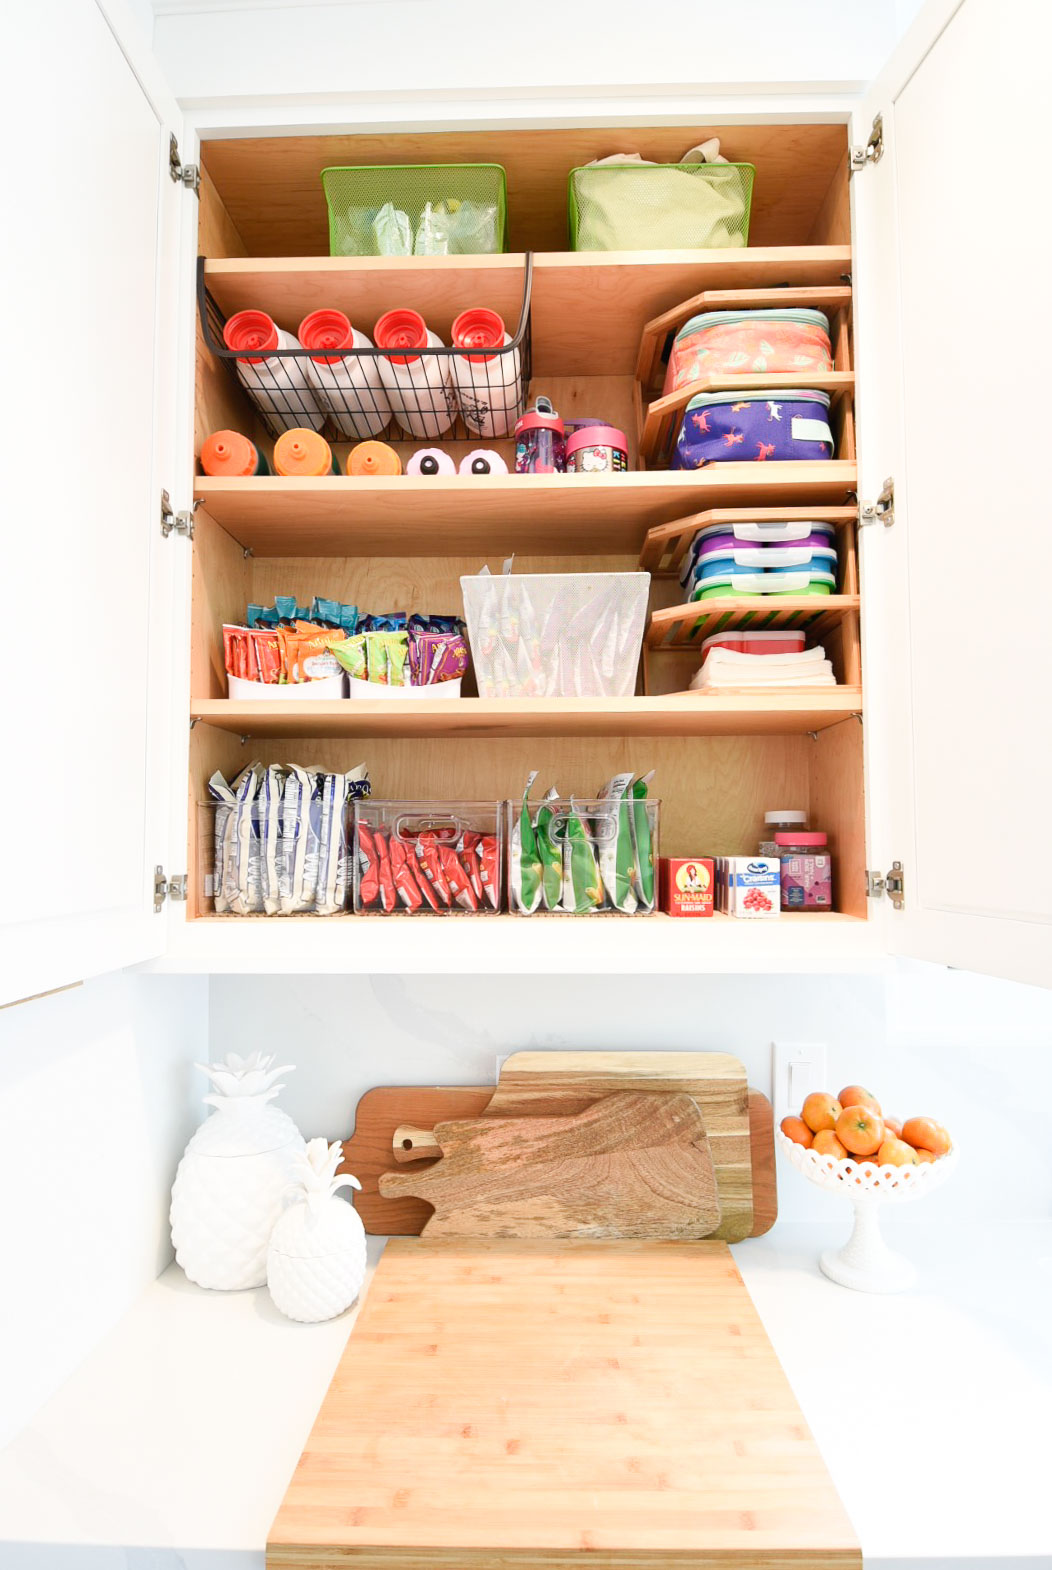 https://www.homewithkeki.com/wp-content/uploads/2019/08/How-to-Organize-the-Pantry-for-Fast-Lunch-Making-4.jpg